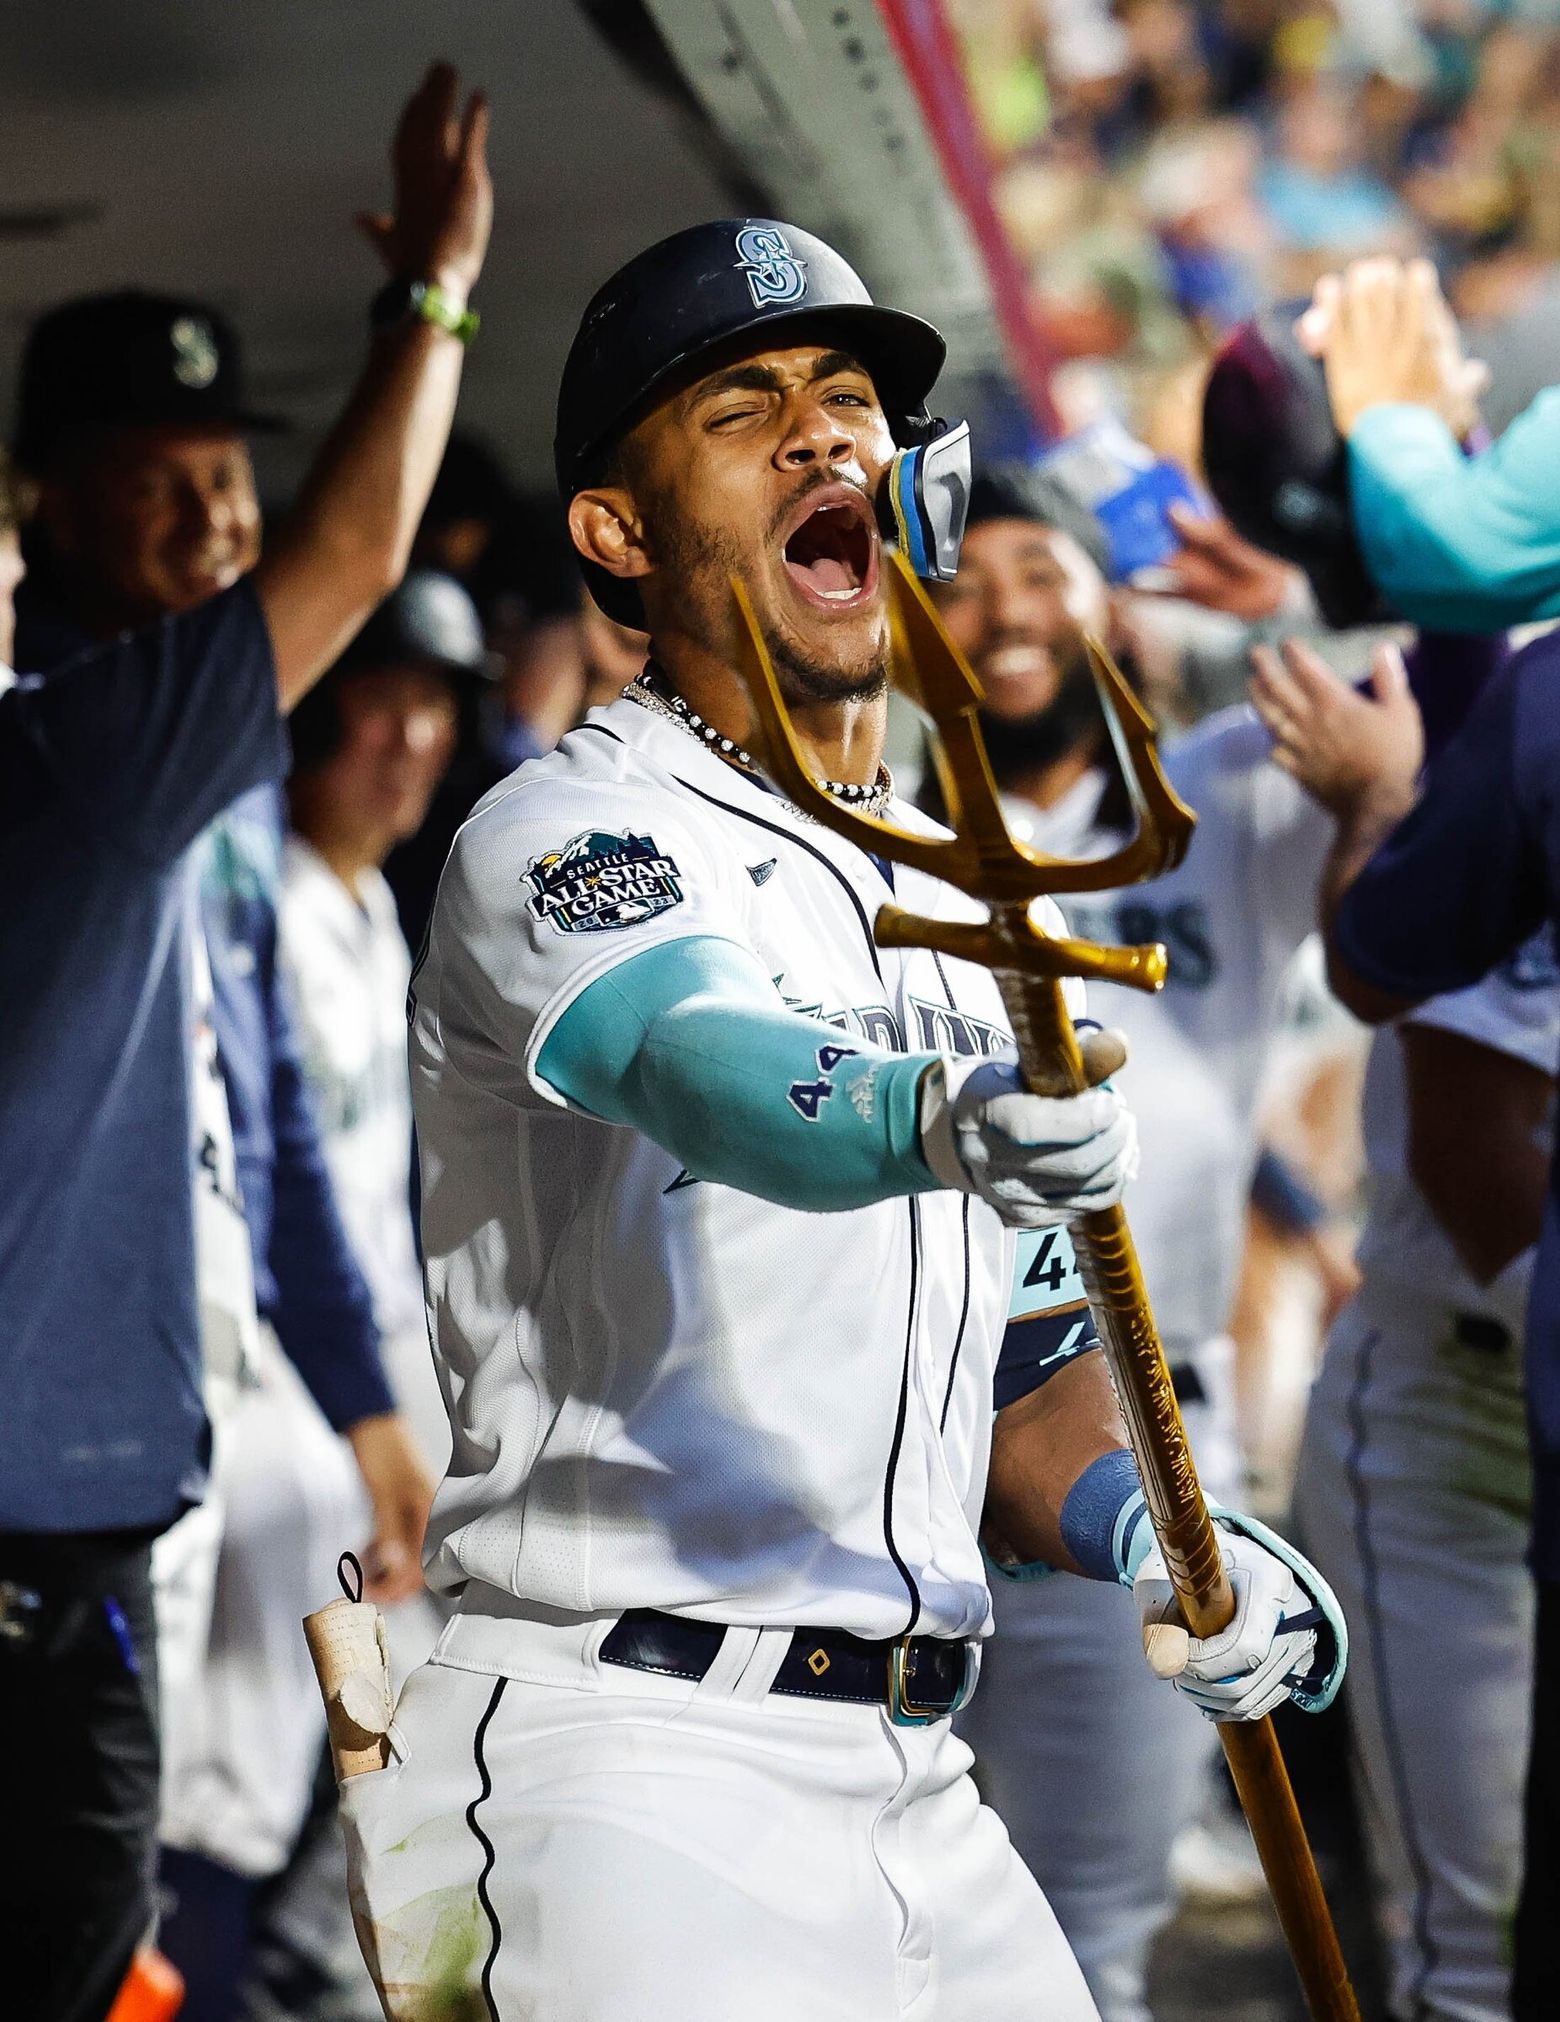 Ranking the best (and worst) Mariners uniforms ever